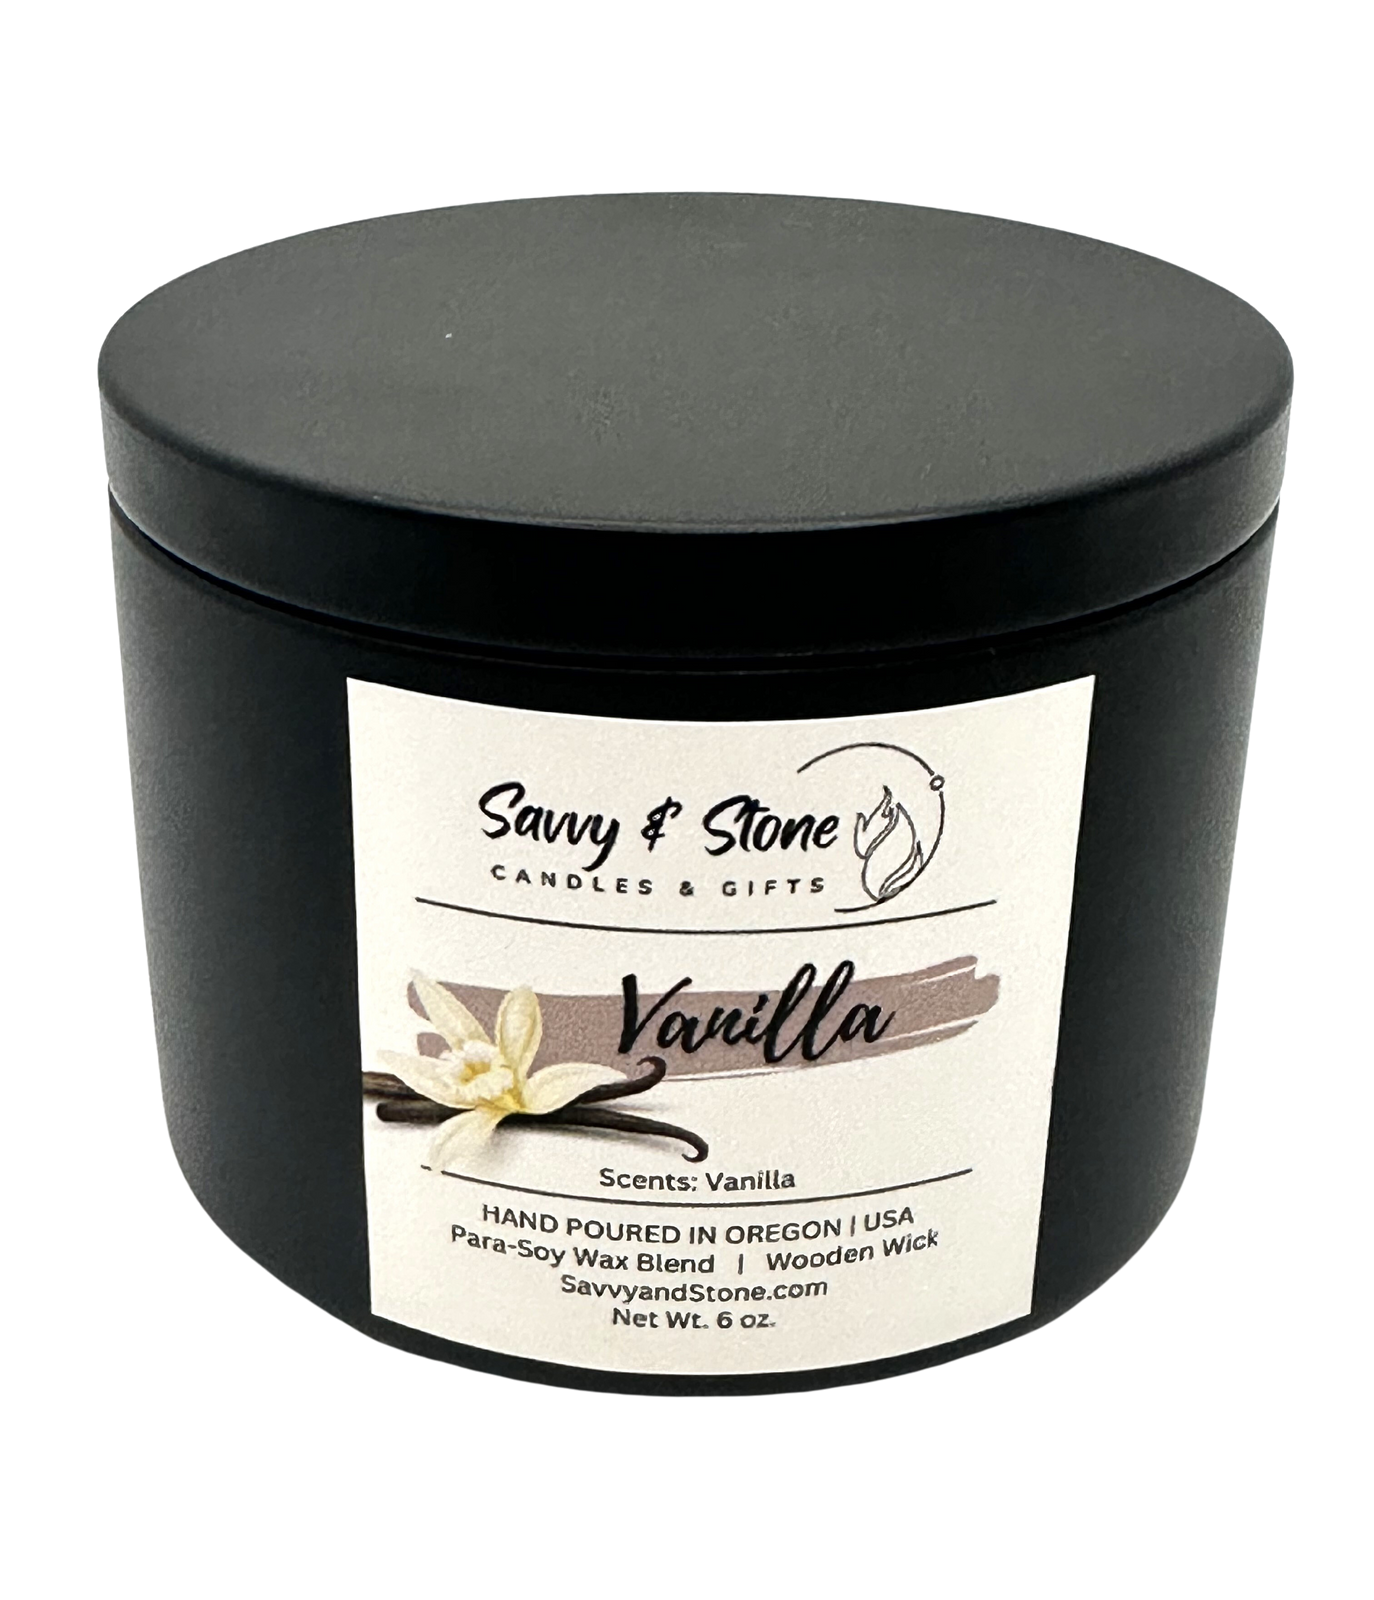 Vanilla / 6oz Wooden Wick Candle in Premium Tin (Free Shipping over $35)